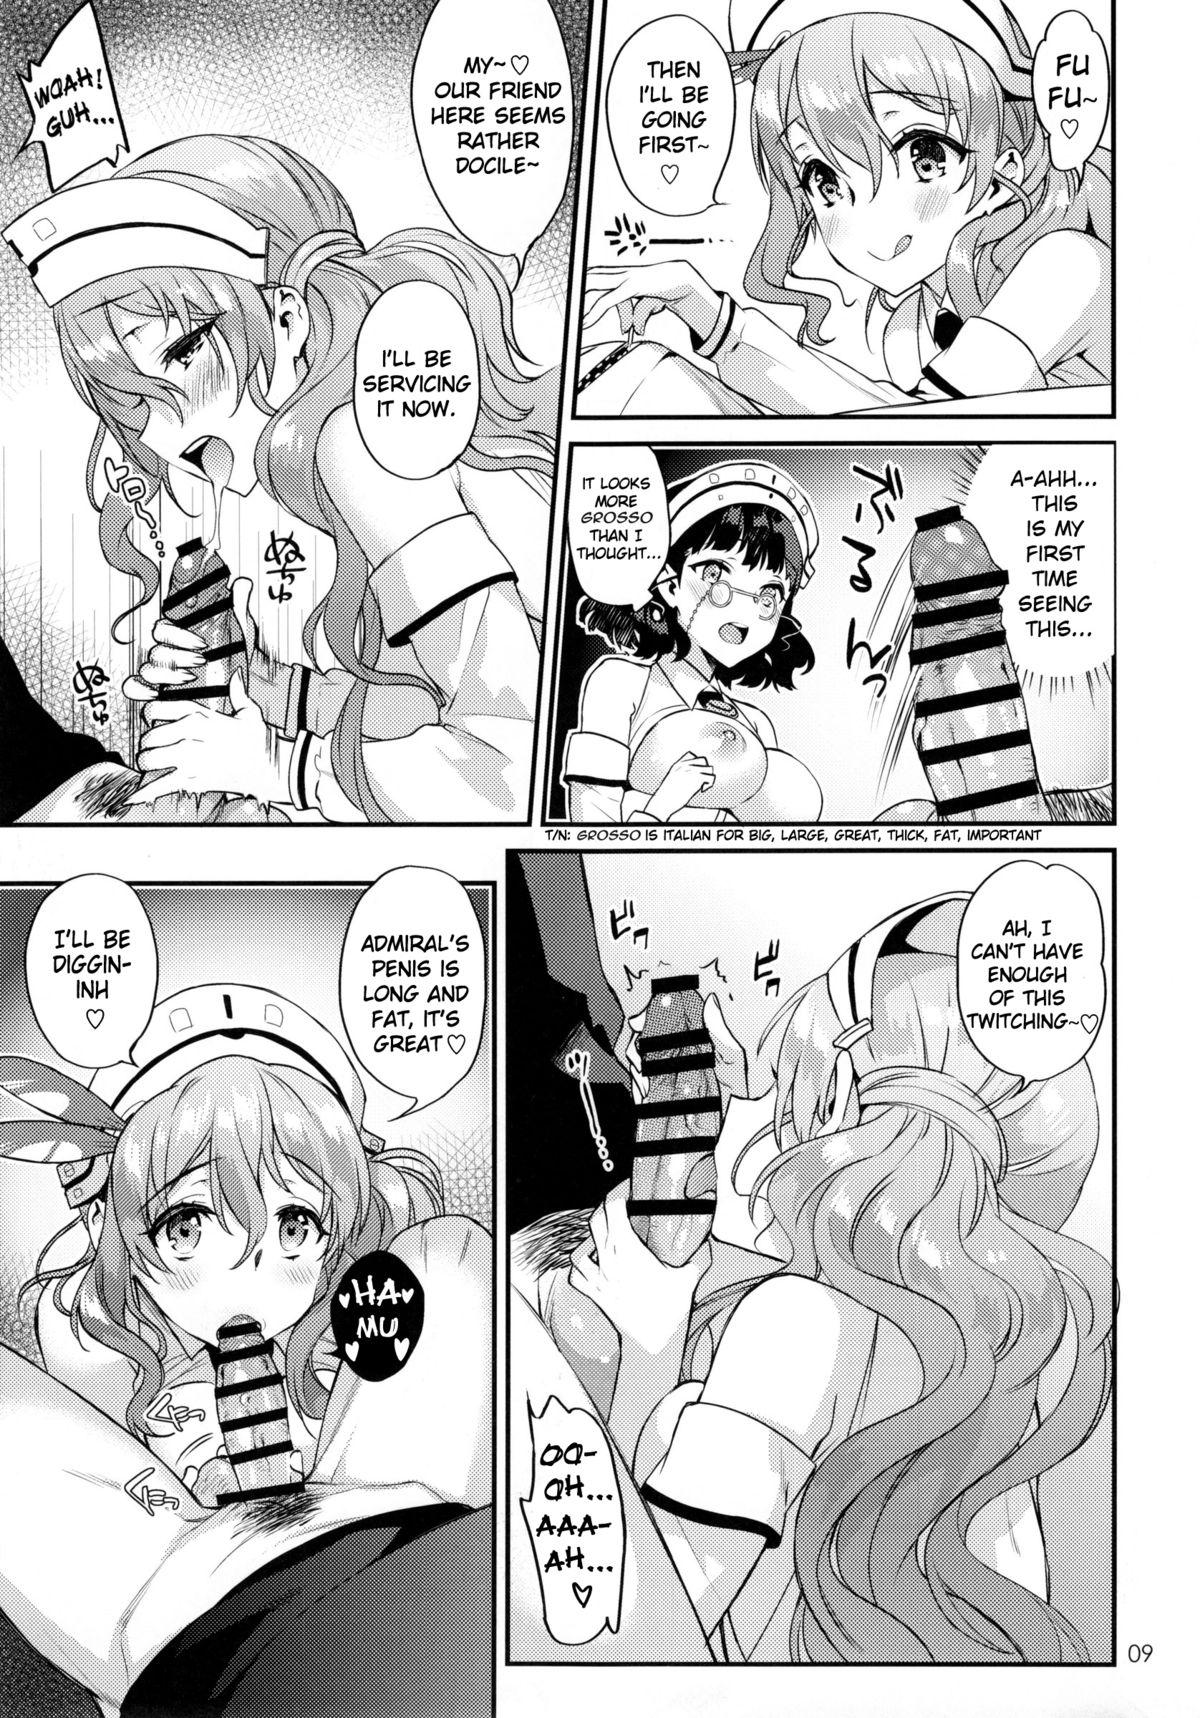 Piercing Buon appetito ! - Kantai collection Sub - Page 8